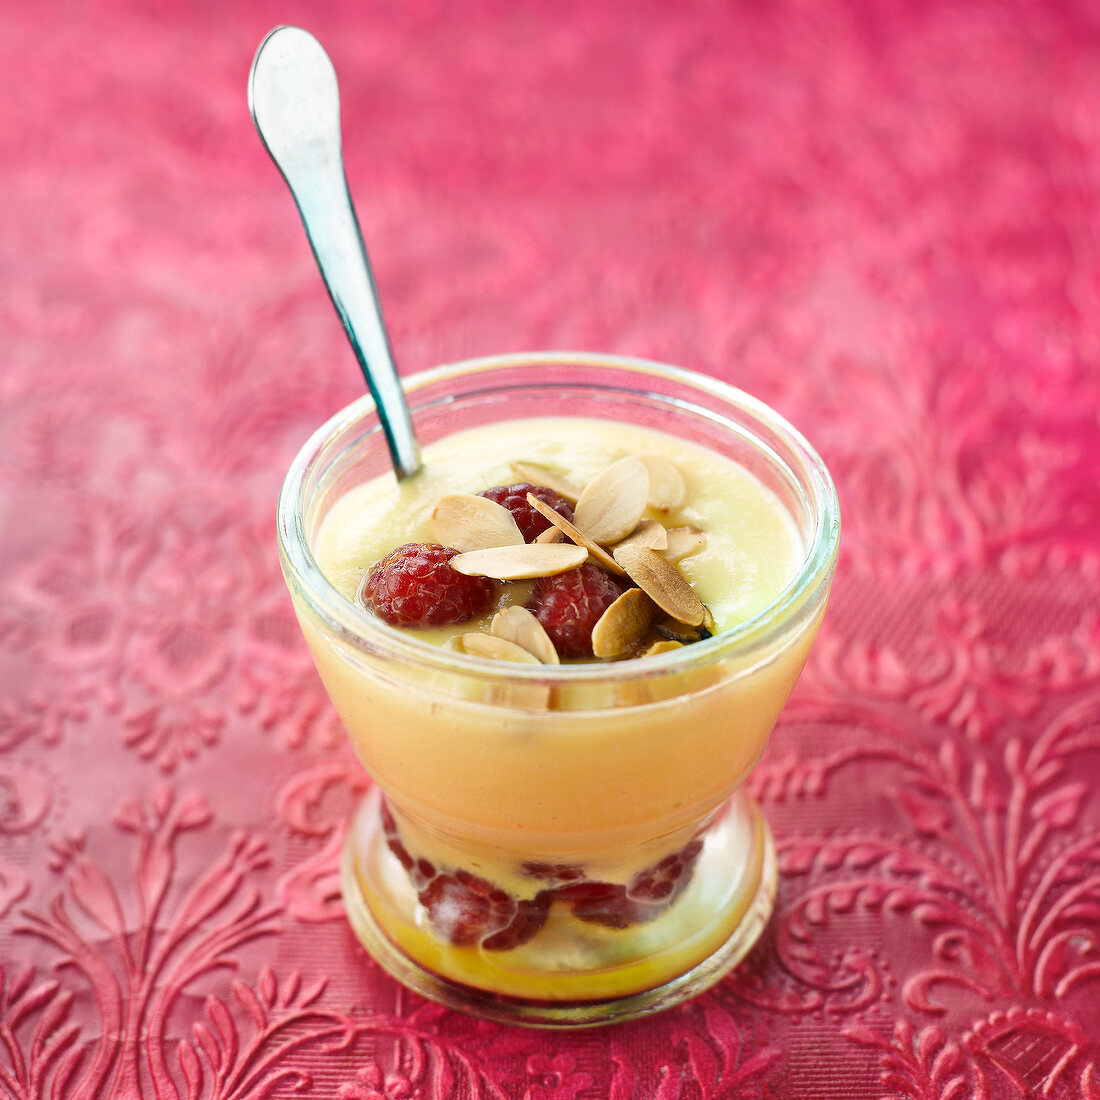 Peach cream dessert with raspberries and thinly sliced almonds